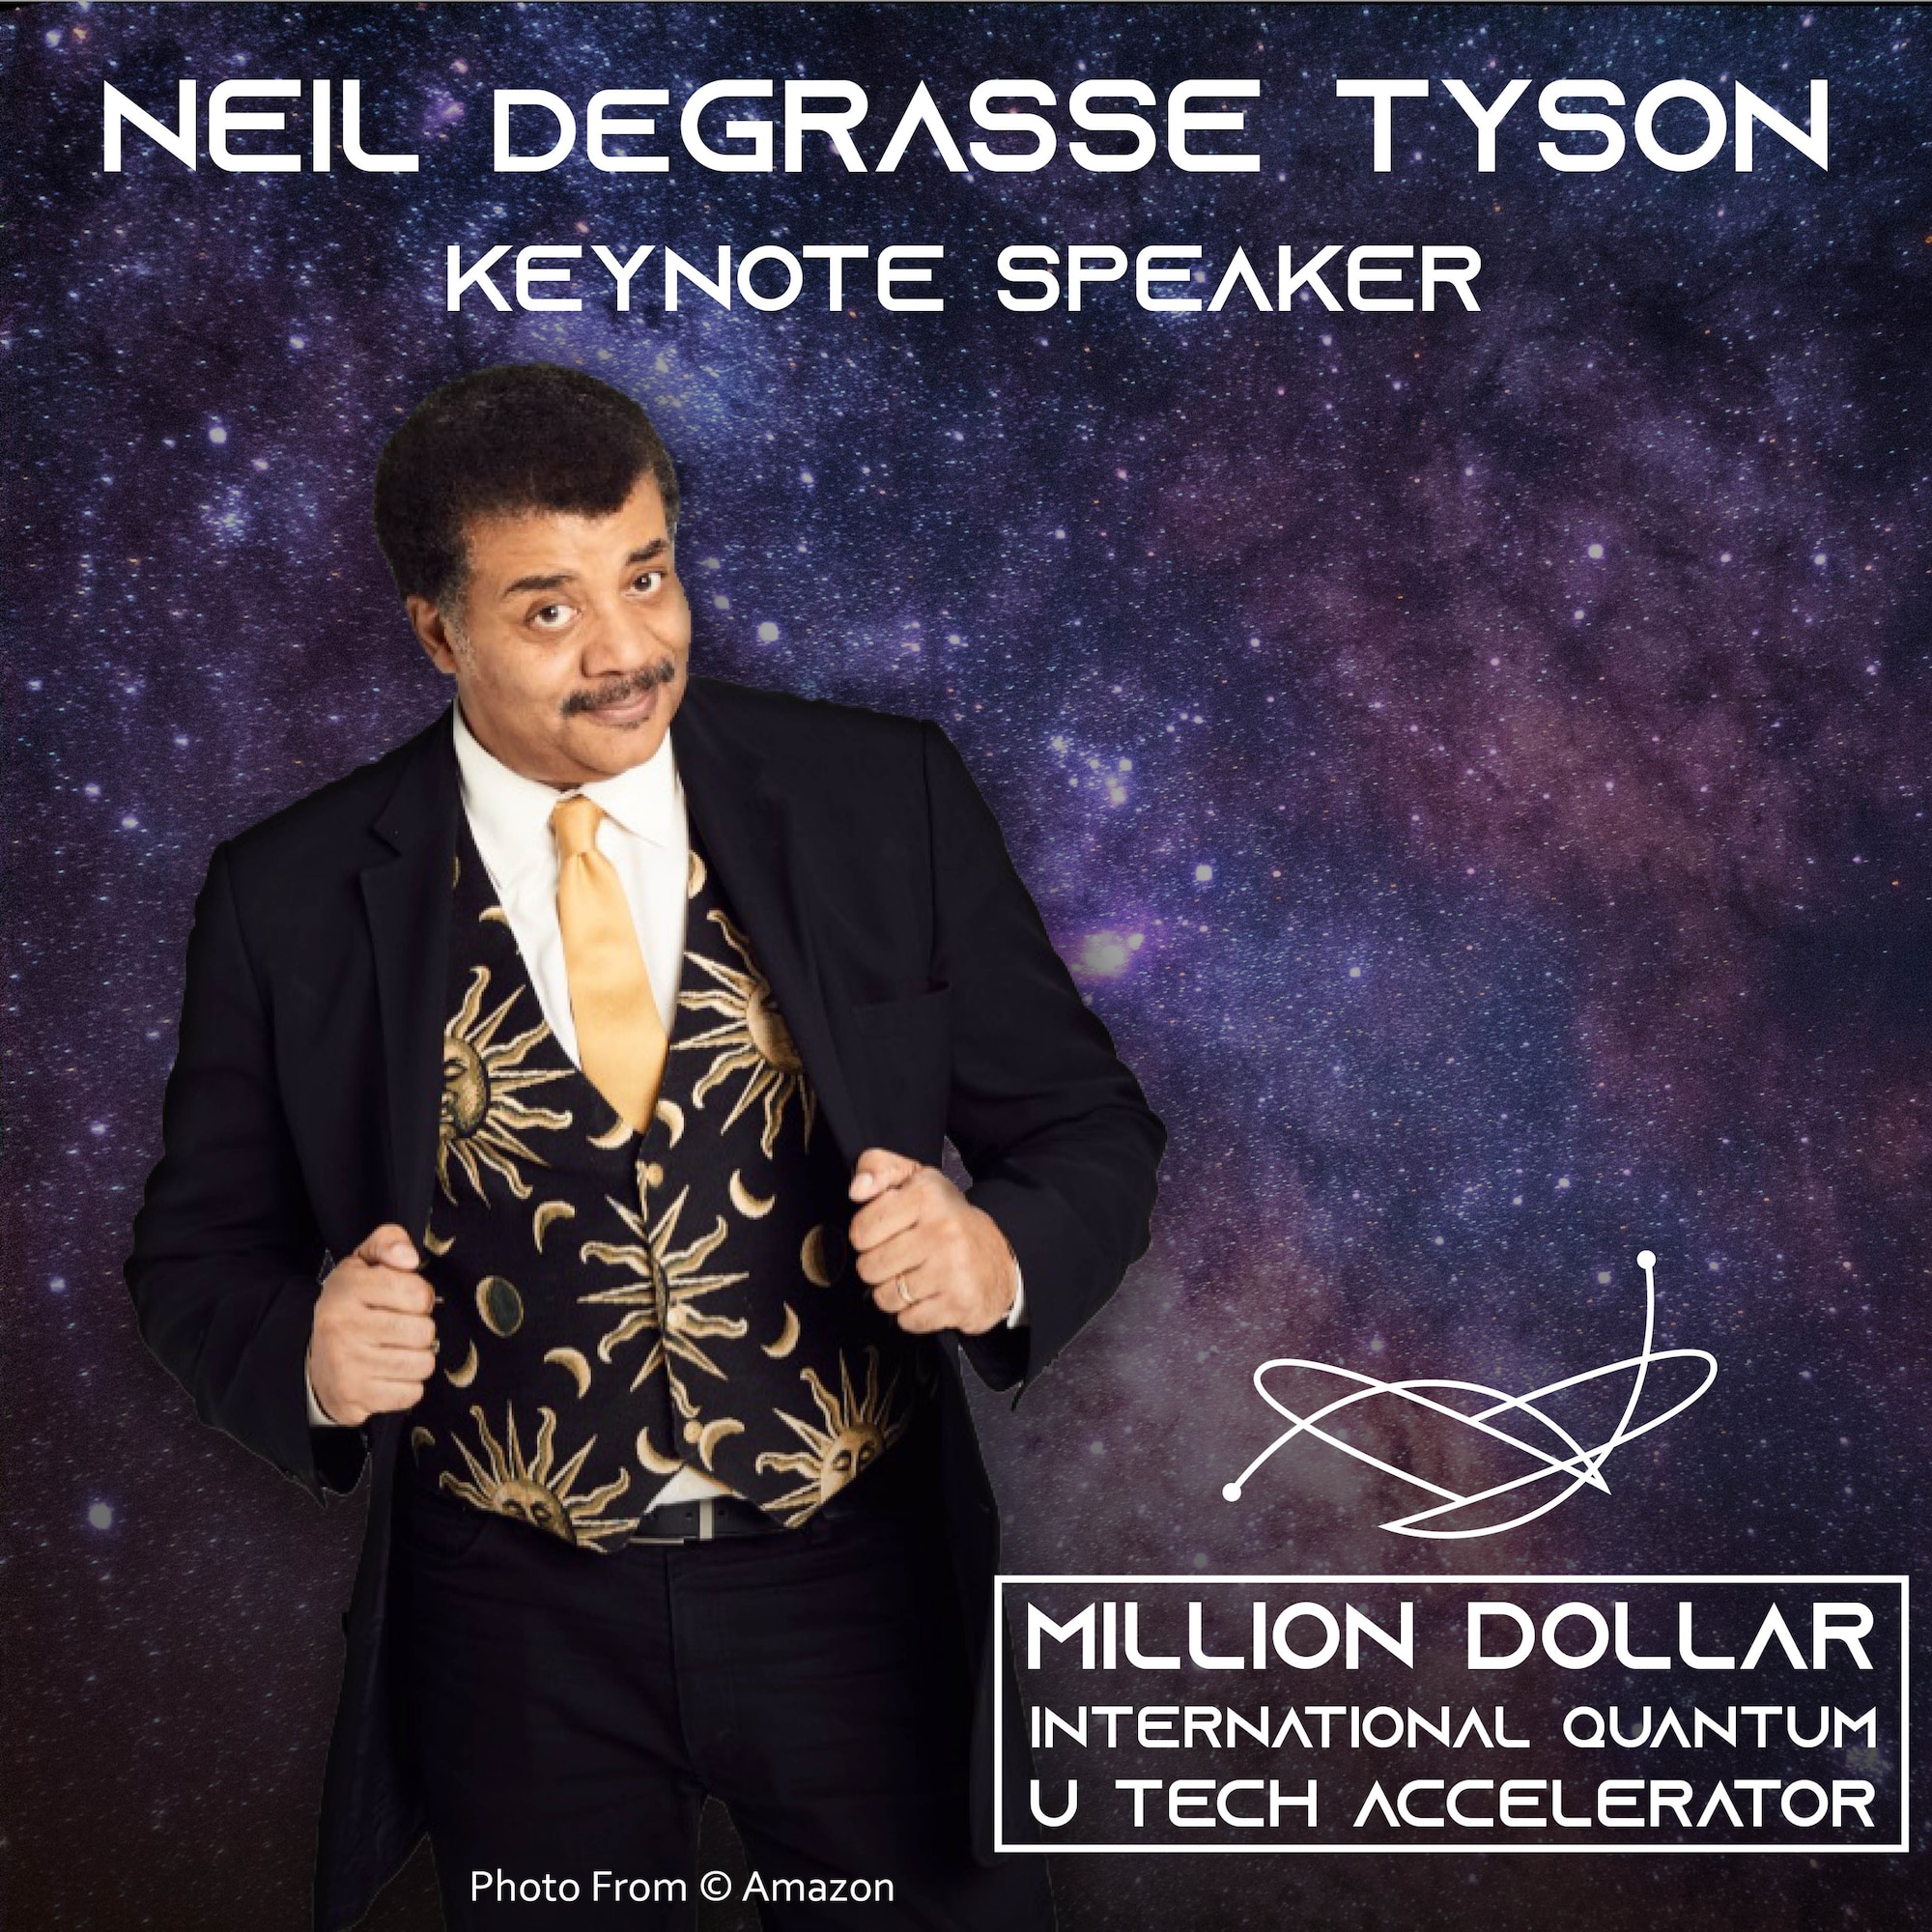 Astrophysicist Dr. Neil deGrasse Tyson, will join U.S. Air Force and U.S. Space Force Acquisition Executive Dr. Will Roper, in delivering a keynote presentation, “Quantum Fundamentals for Everyone,” at 10 a.m. Eastern, September 3, during the live, virtual “Million Dollar International Quantum U Tech Accelerator.” (Photo courtesy of © Amazon.)